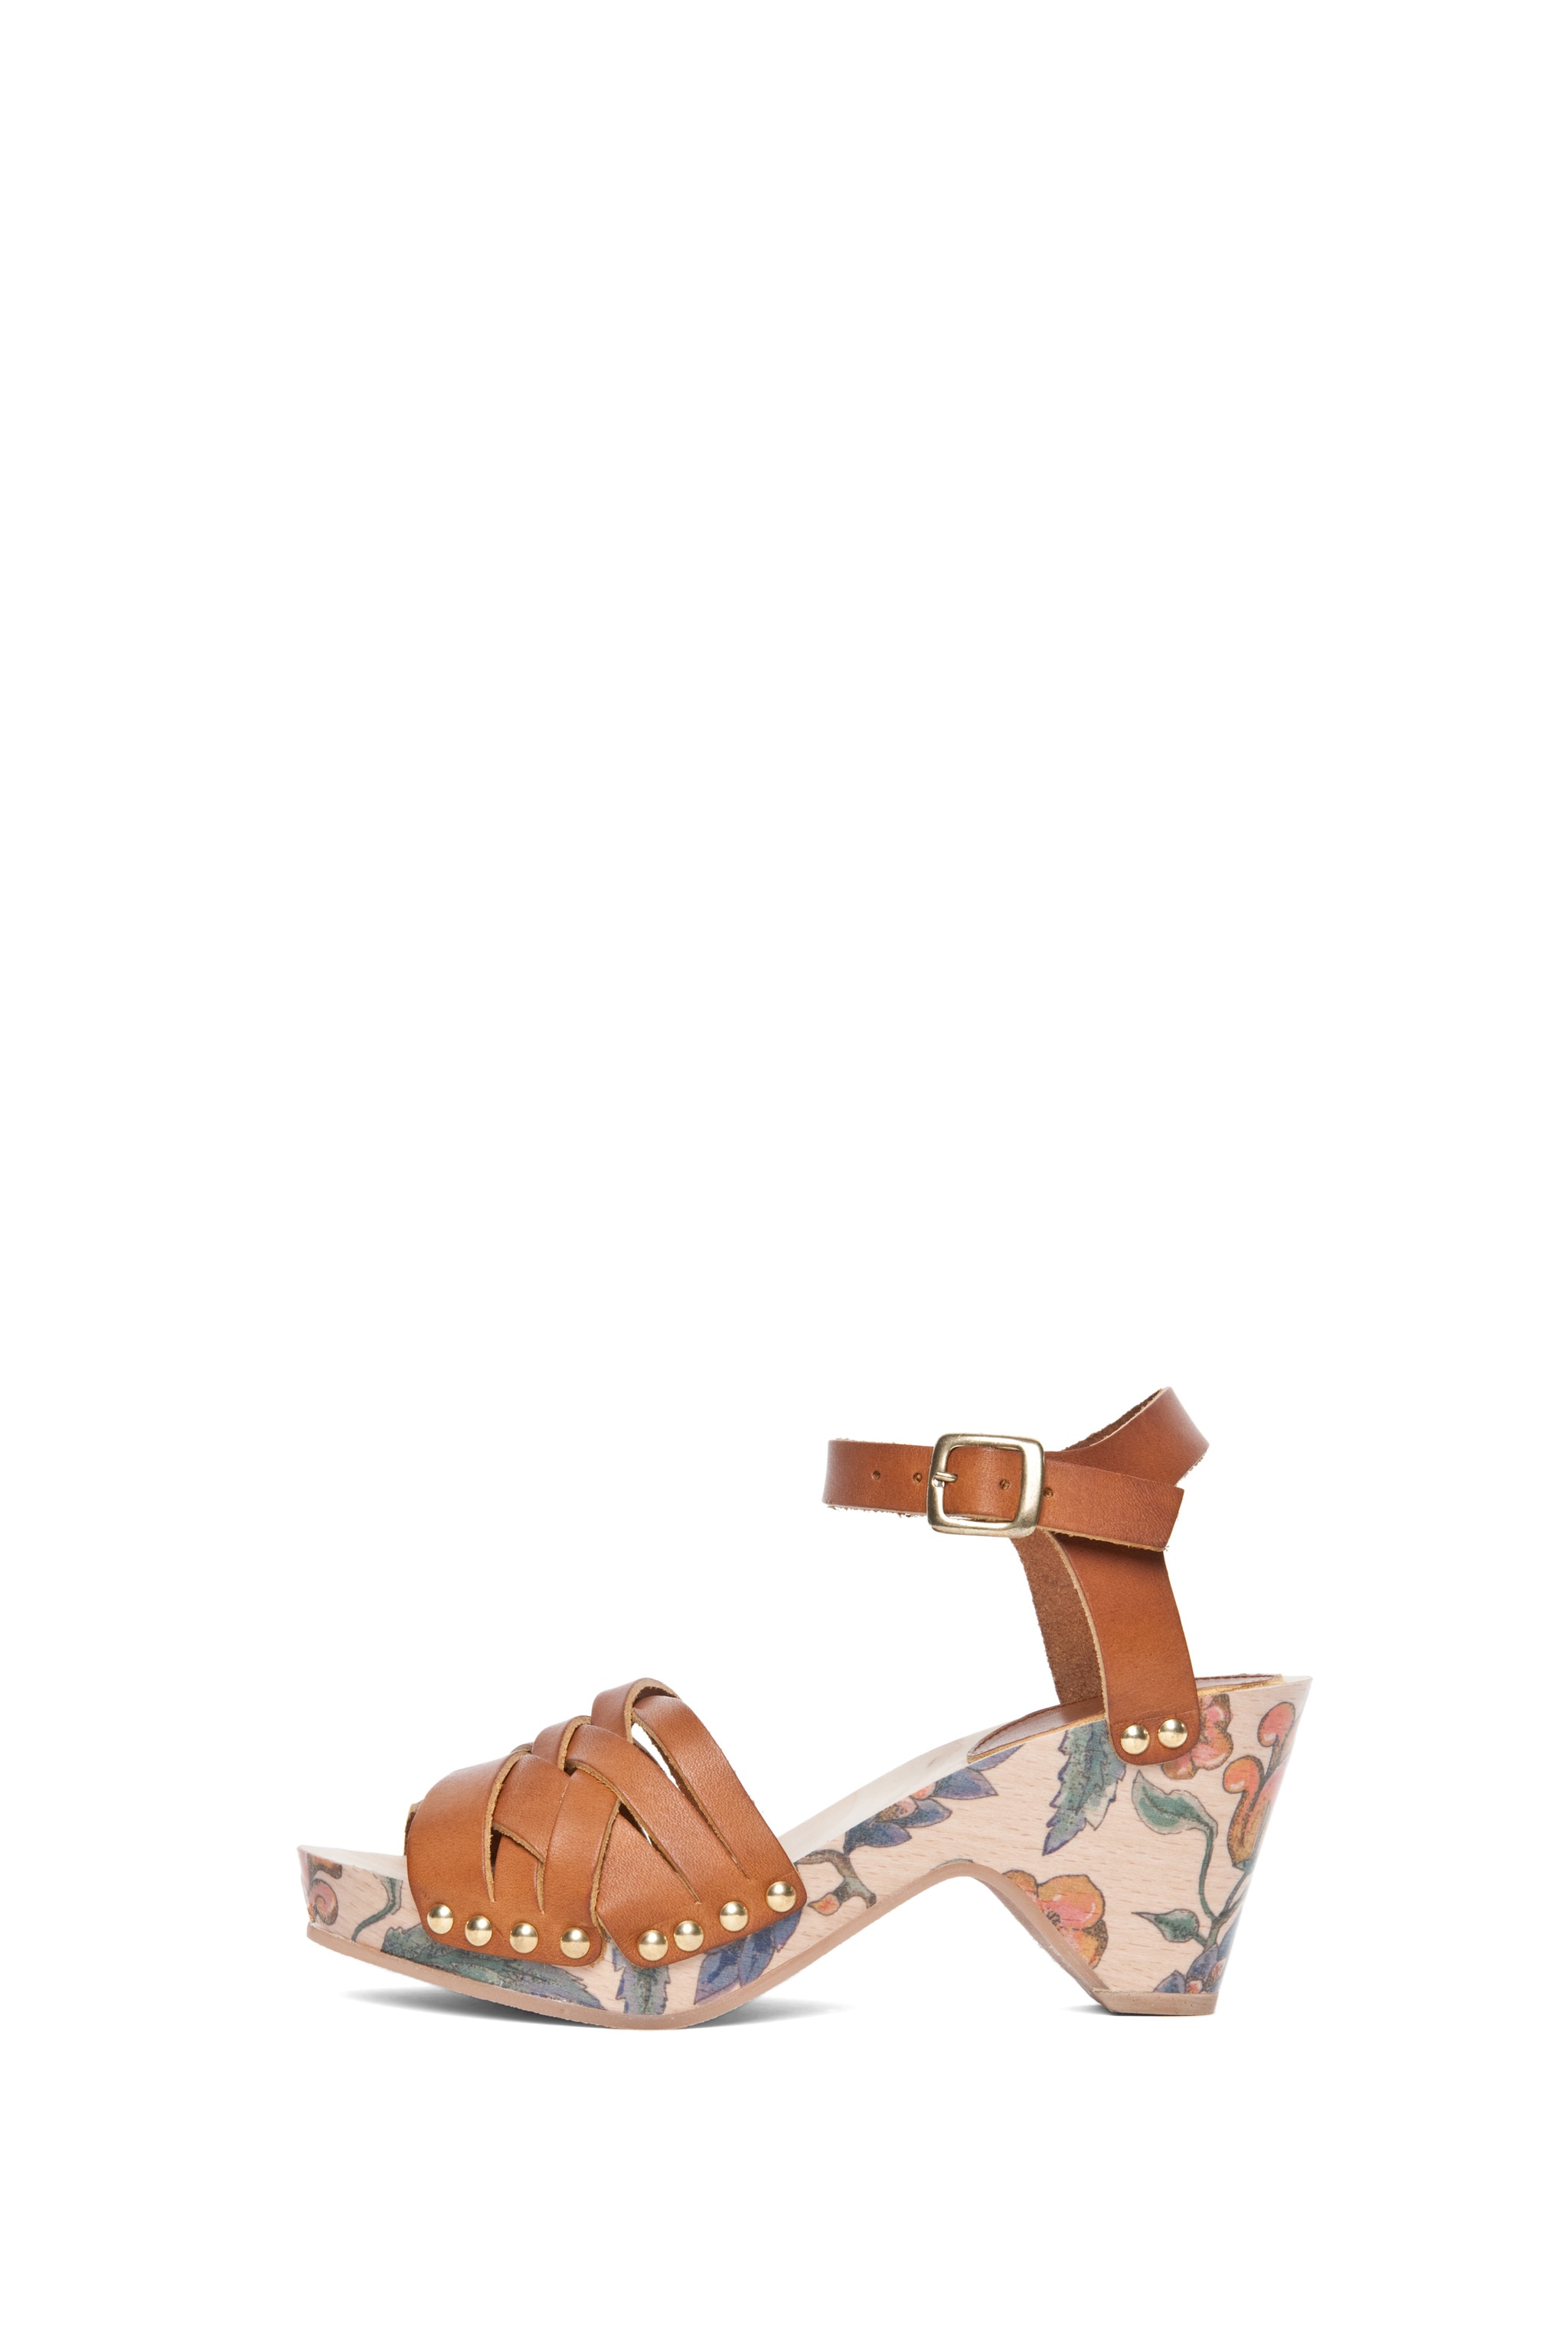 Image 1 of Isabel Marant Silway Sandal in Henna